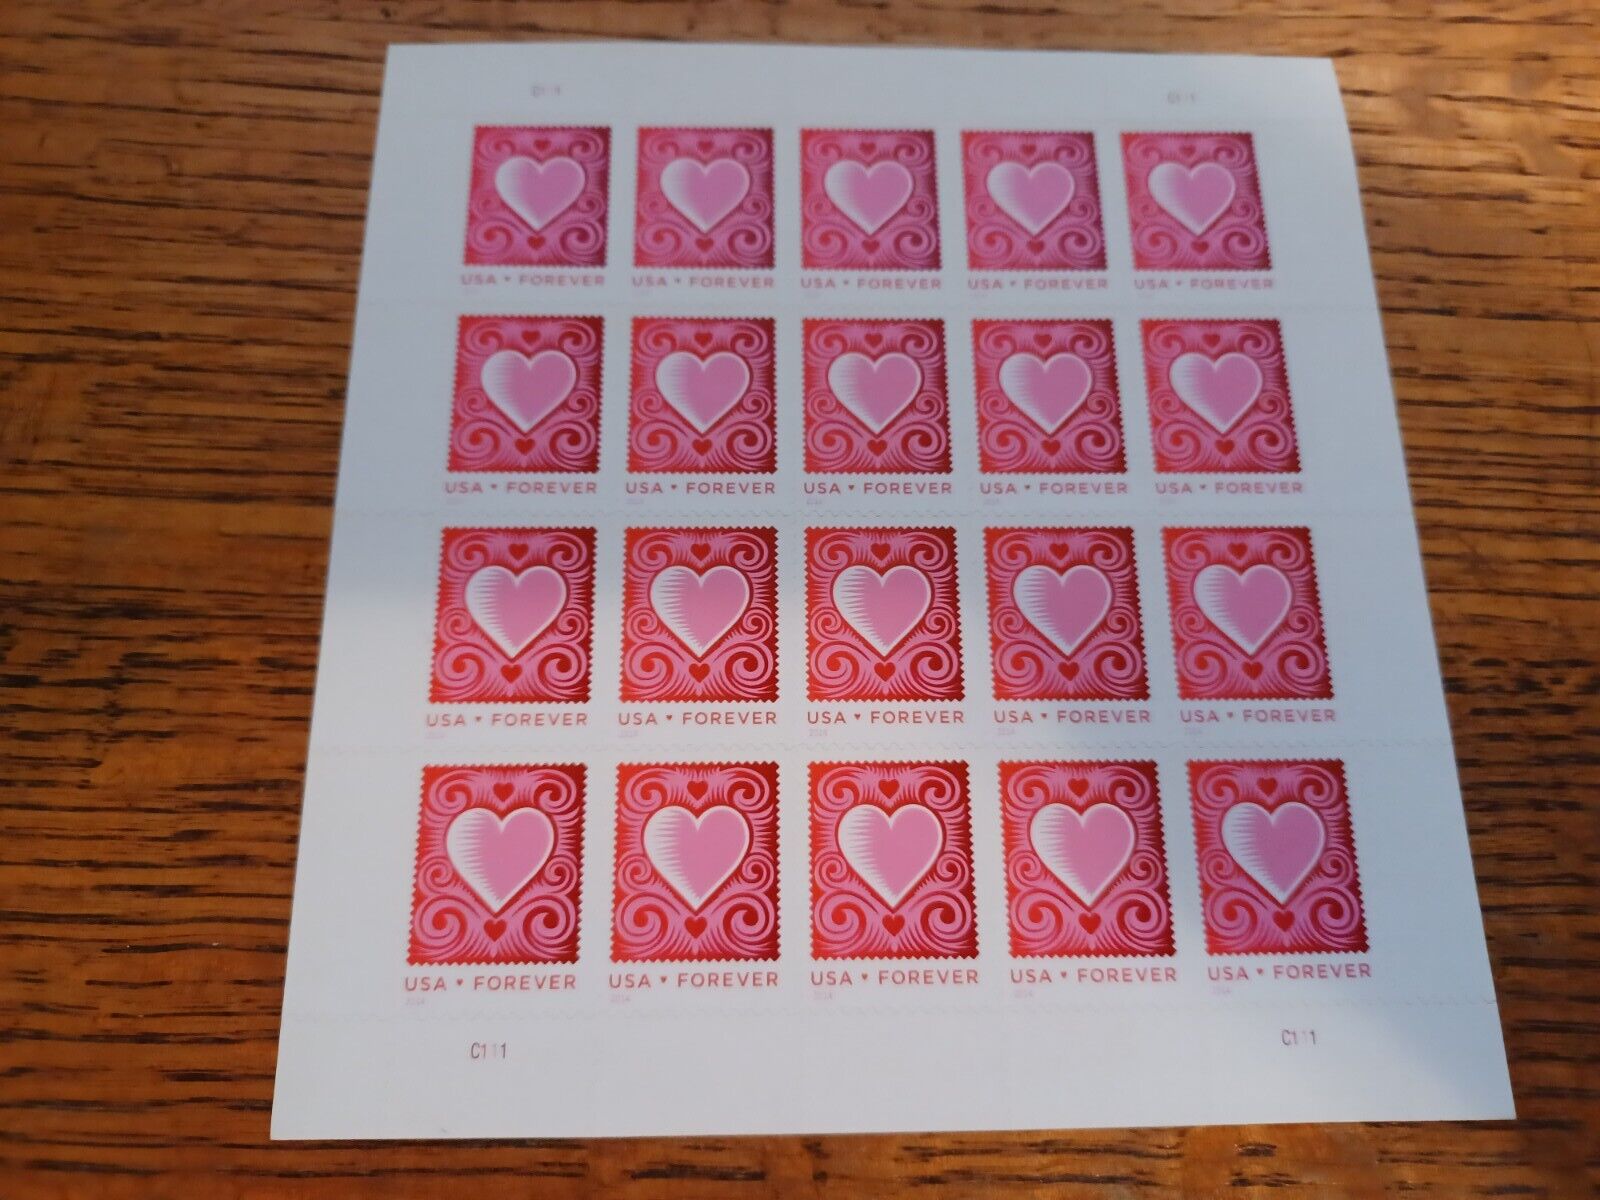 4847 - 2014 First-Class Forever Stamp - Love Series: Cut Paper Heart -  Mystic Stamp Company